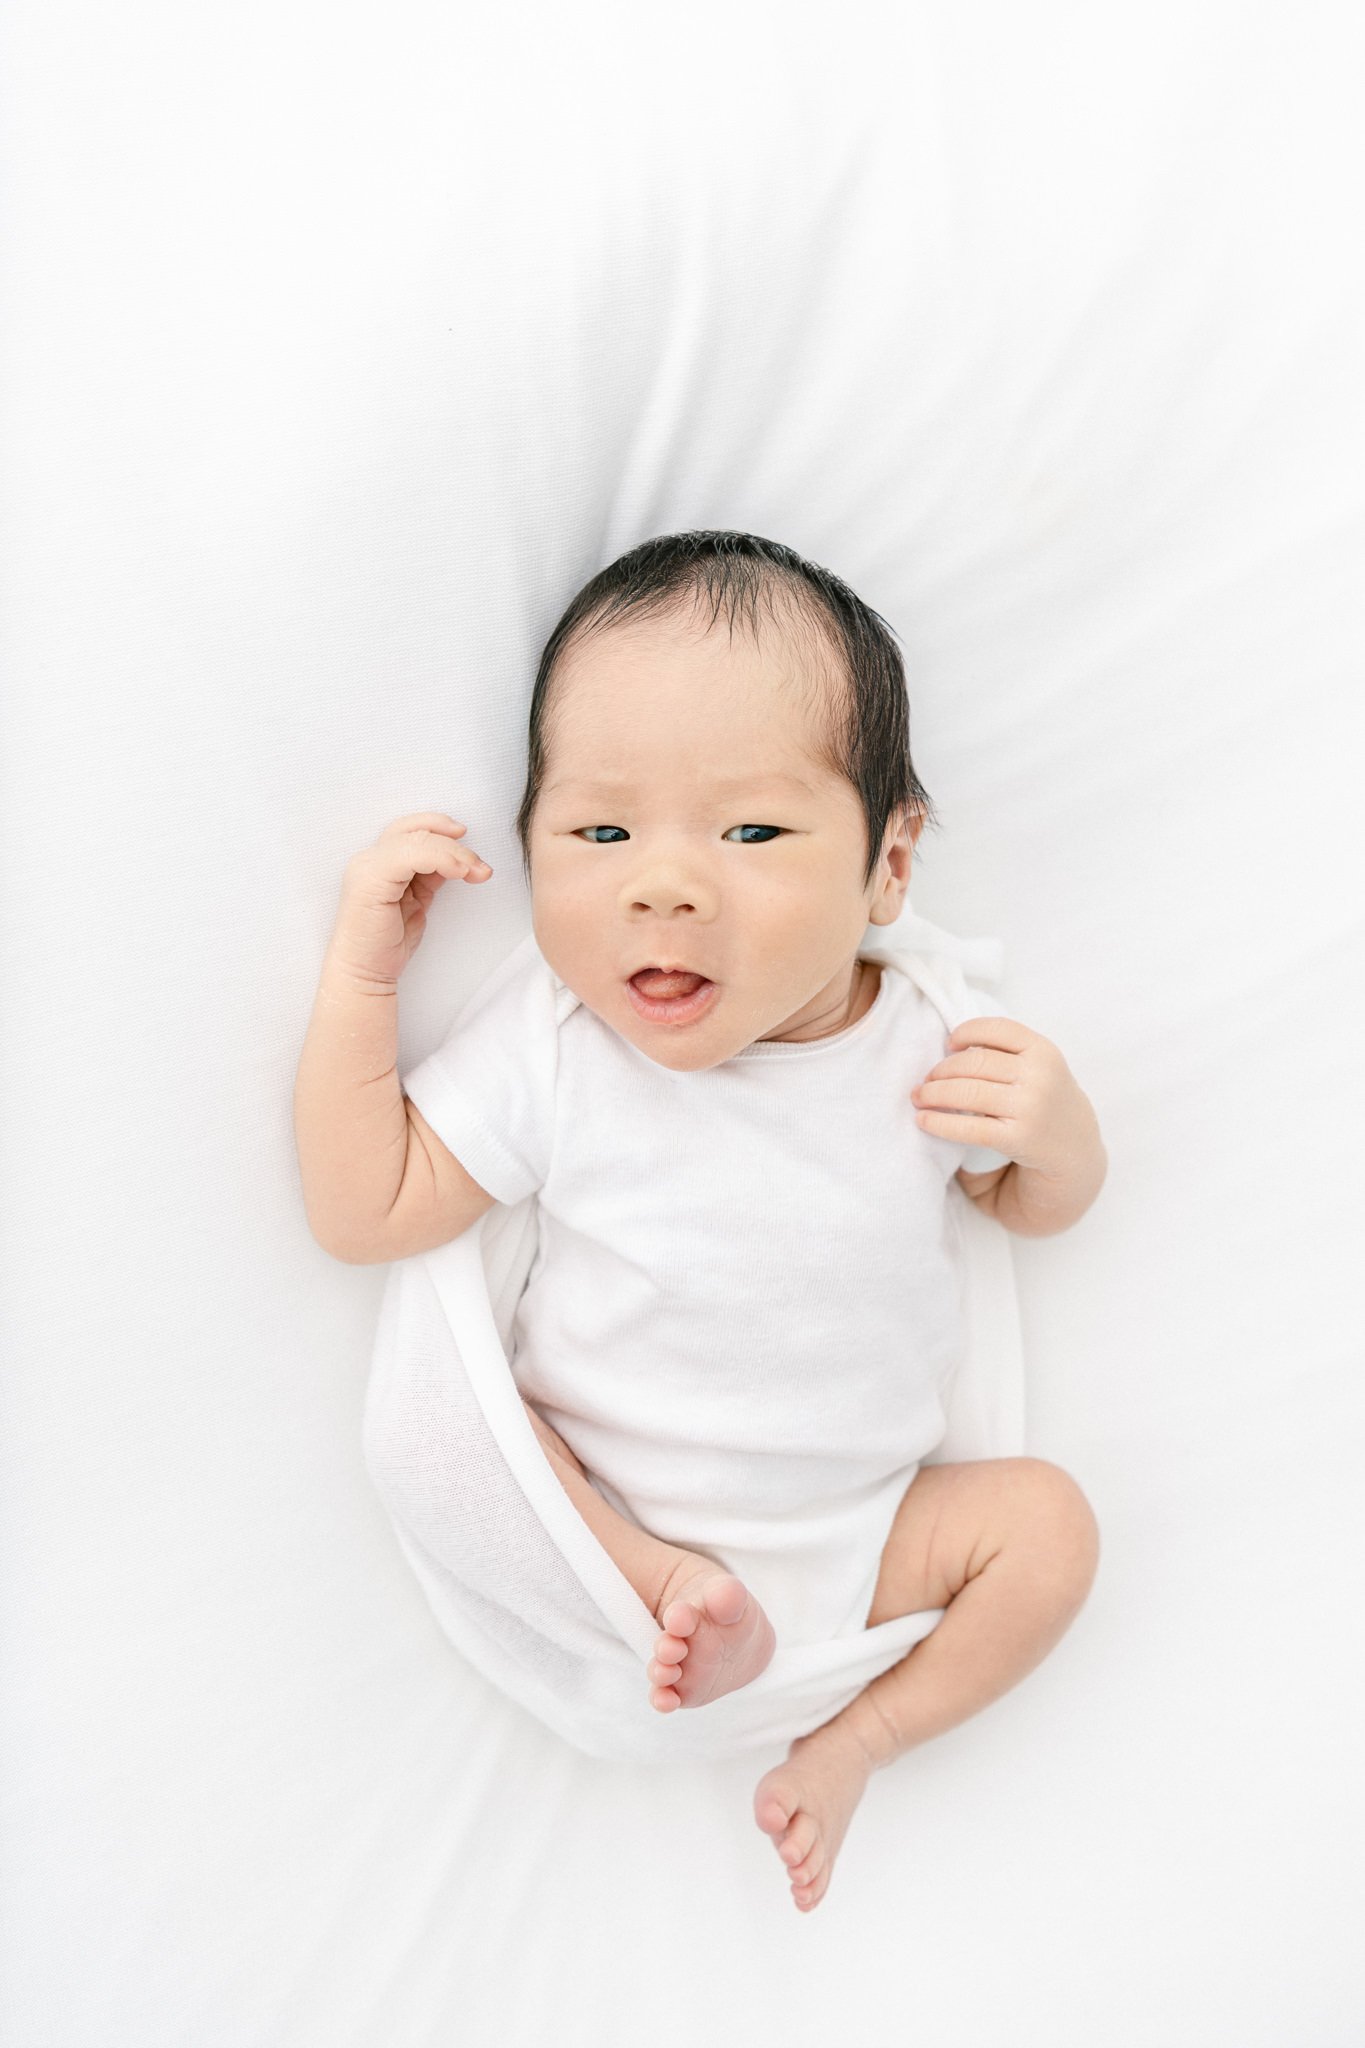  A newborn photographer Nicole Hawkins photography captures a baby boy in a white onesie laying on a bed. baby boy on a bed studio newborns east coast #NicoleHawkinsPhotography #NicoleHawkinsNewborns #Babyboy #studionewbornsNJ #studionewbonportraits 